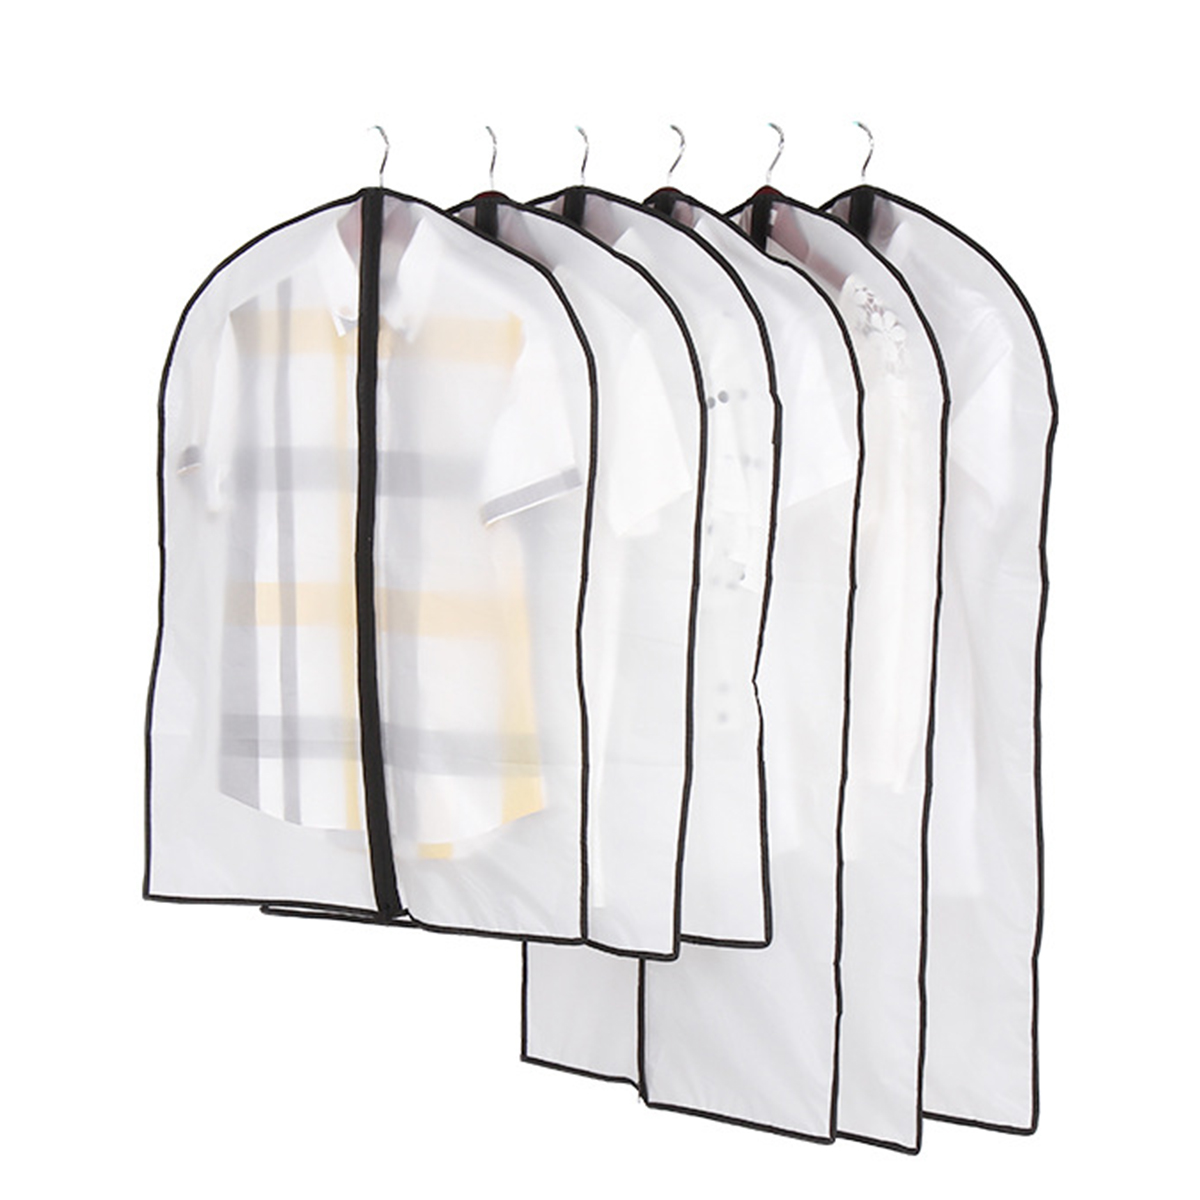 Plastic-Clothing-Covers-Clear-Dust-proof-Cloth-Cover-Suit-Dress-Clothes-Bag-Storage-Protector-1559752-5